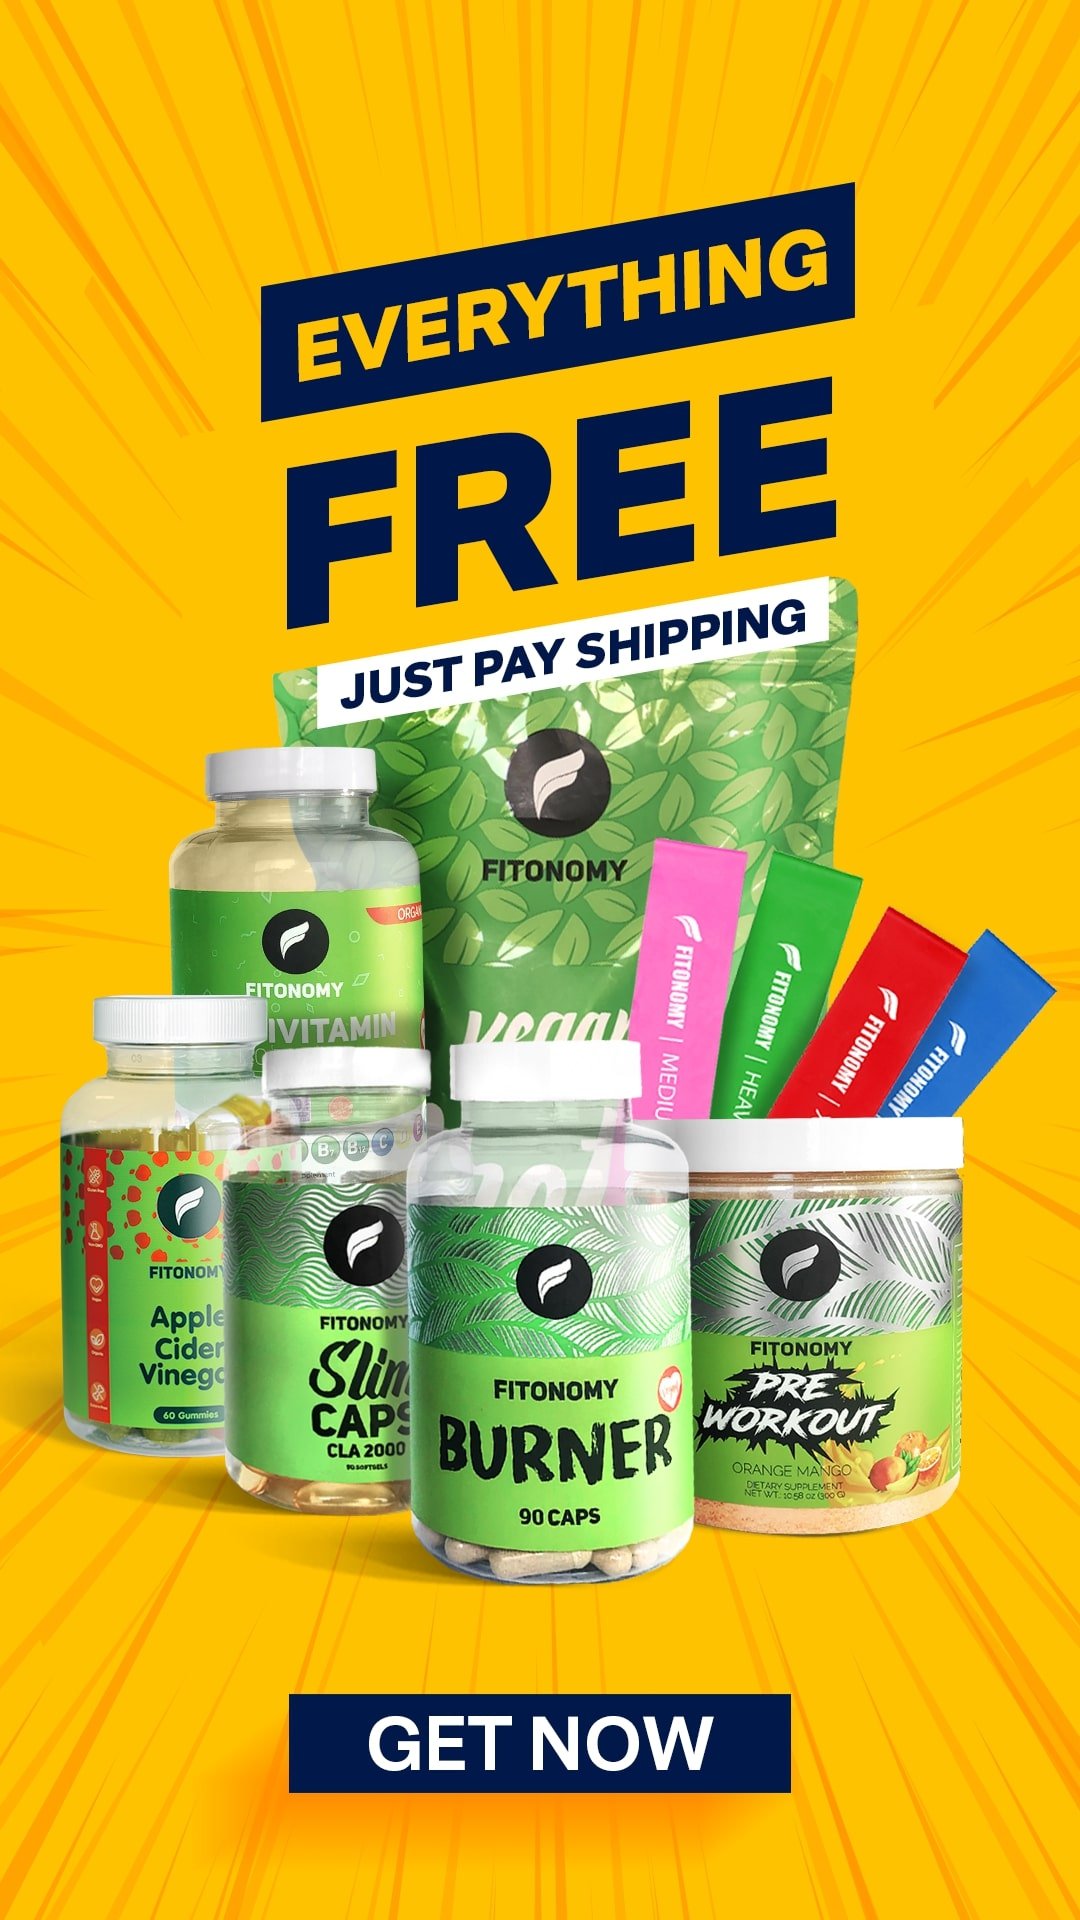 Fitonomy products are free just pay the shipping fee